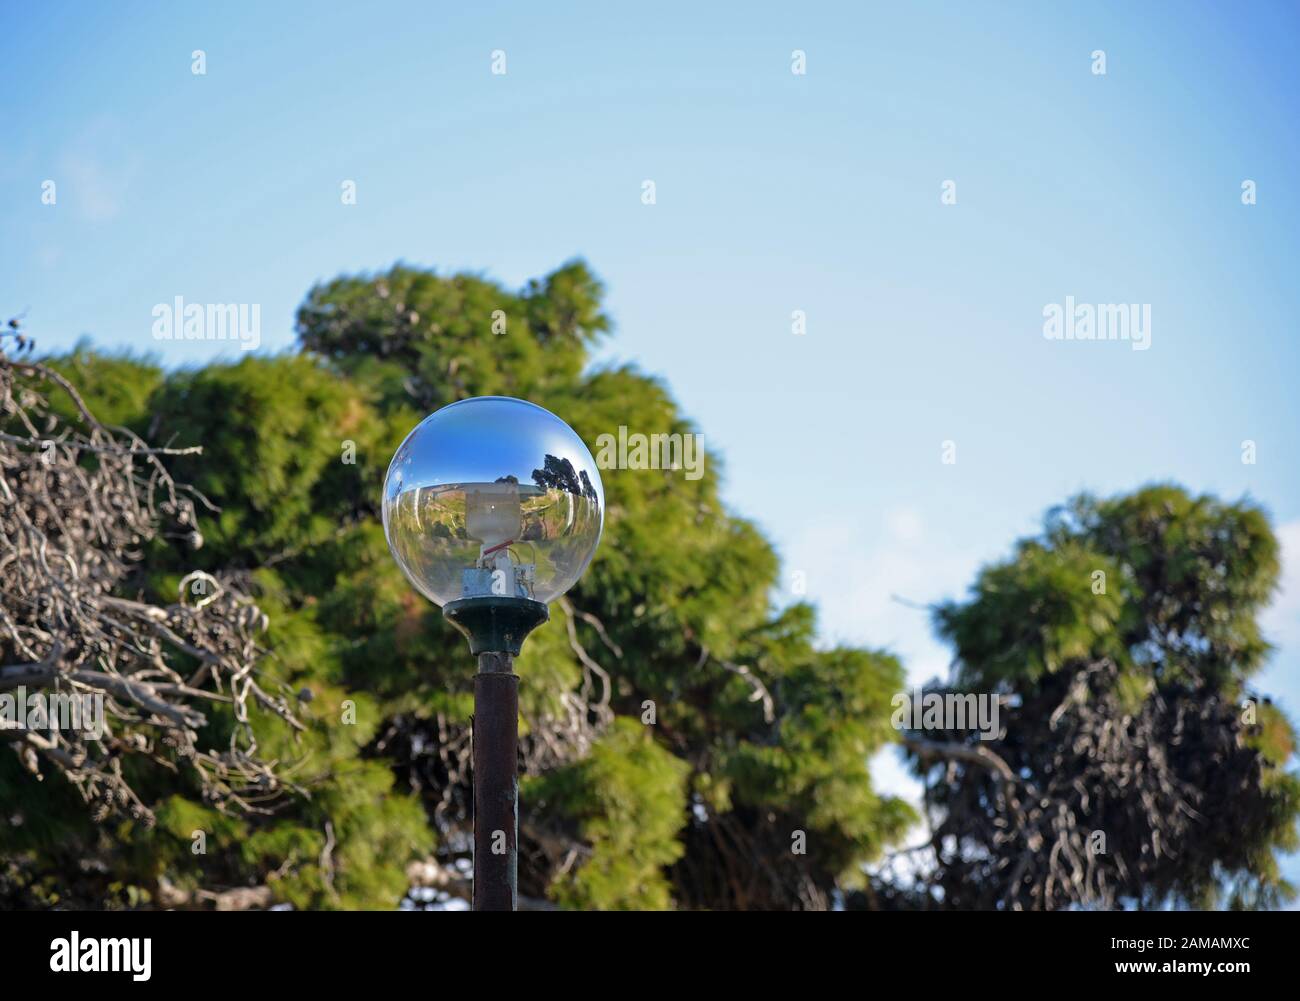 Reflection of the surroundings on a street light. Stock Photo